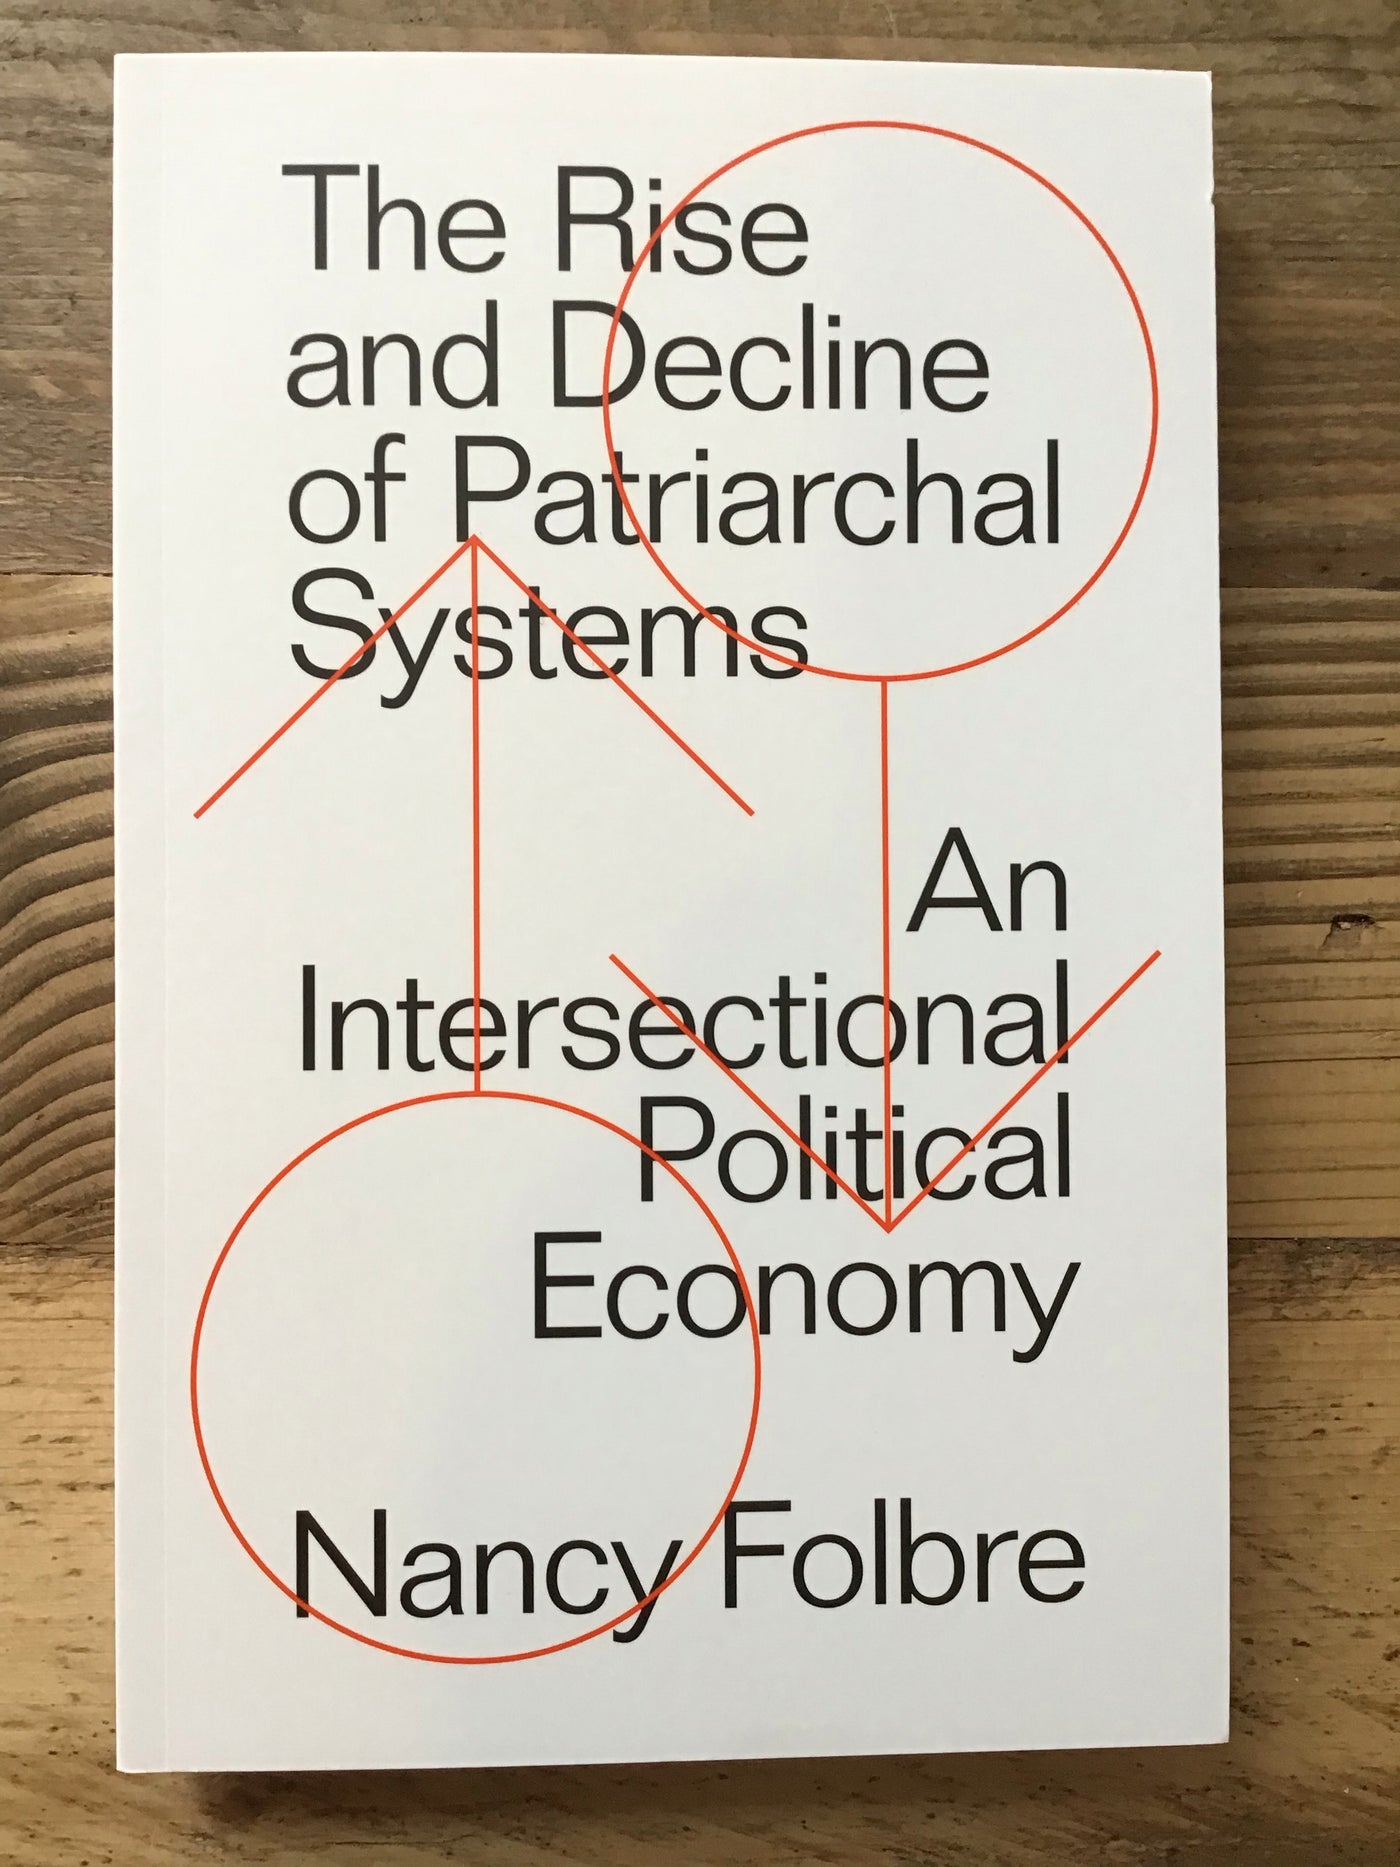 The Rise and Decline of Patriarchal Systems: An Intersectional Political Economy